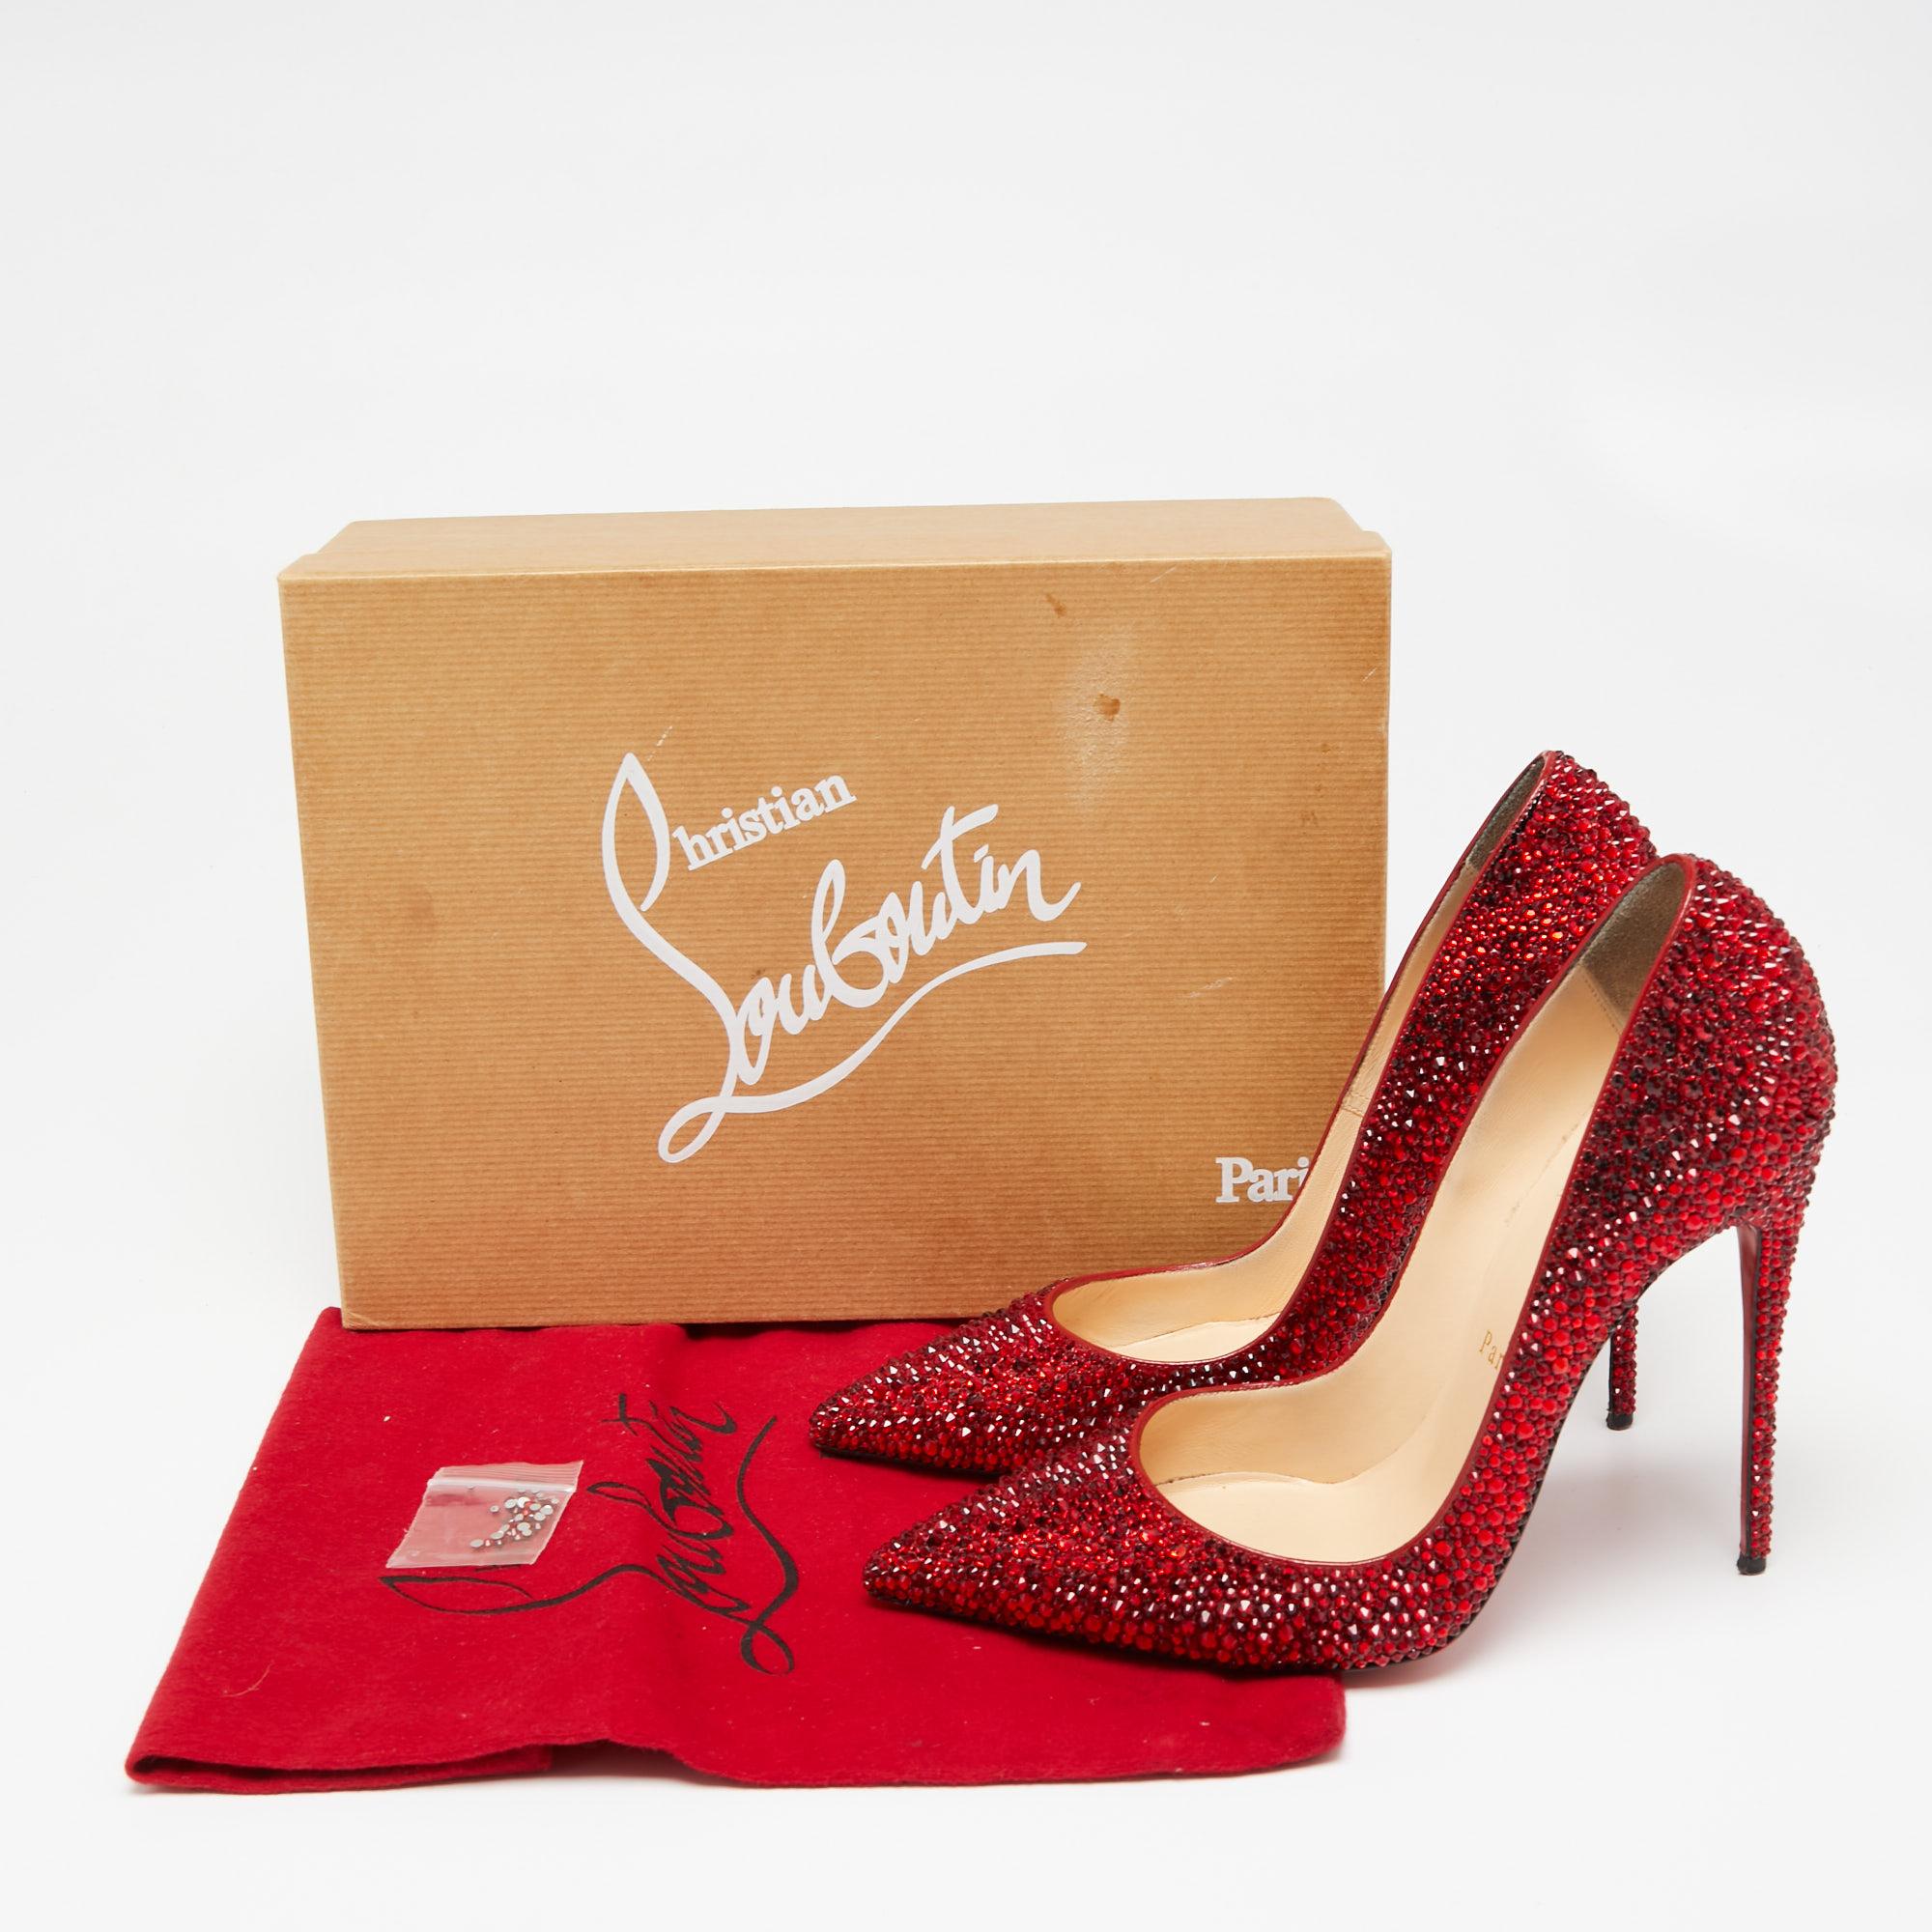 Women's Christian Louboutin Red Leather Strass Degrade So Kate Pumps Size 39